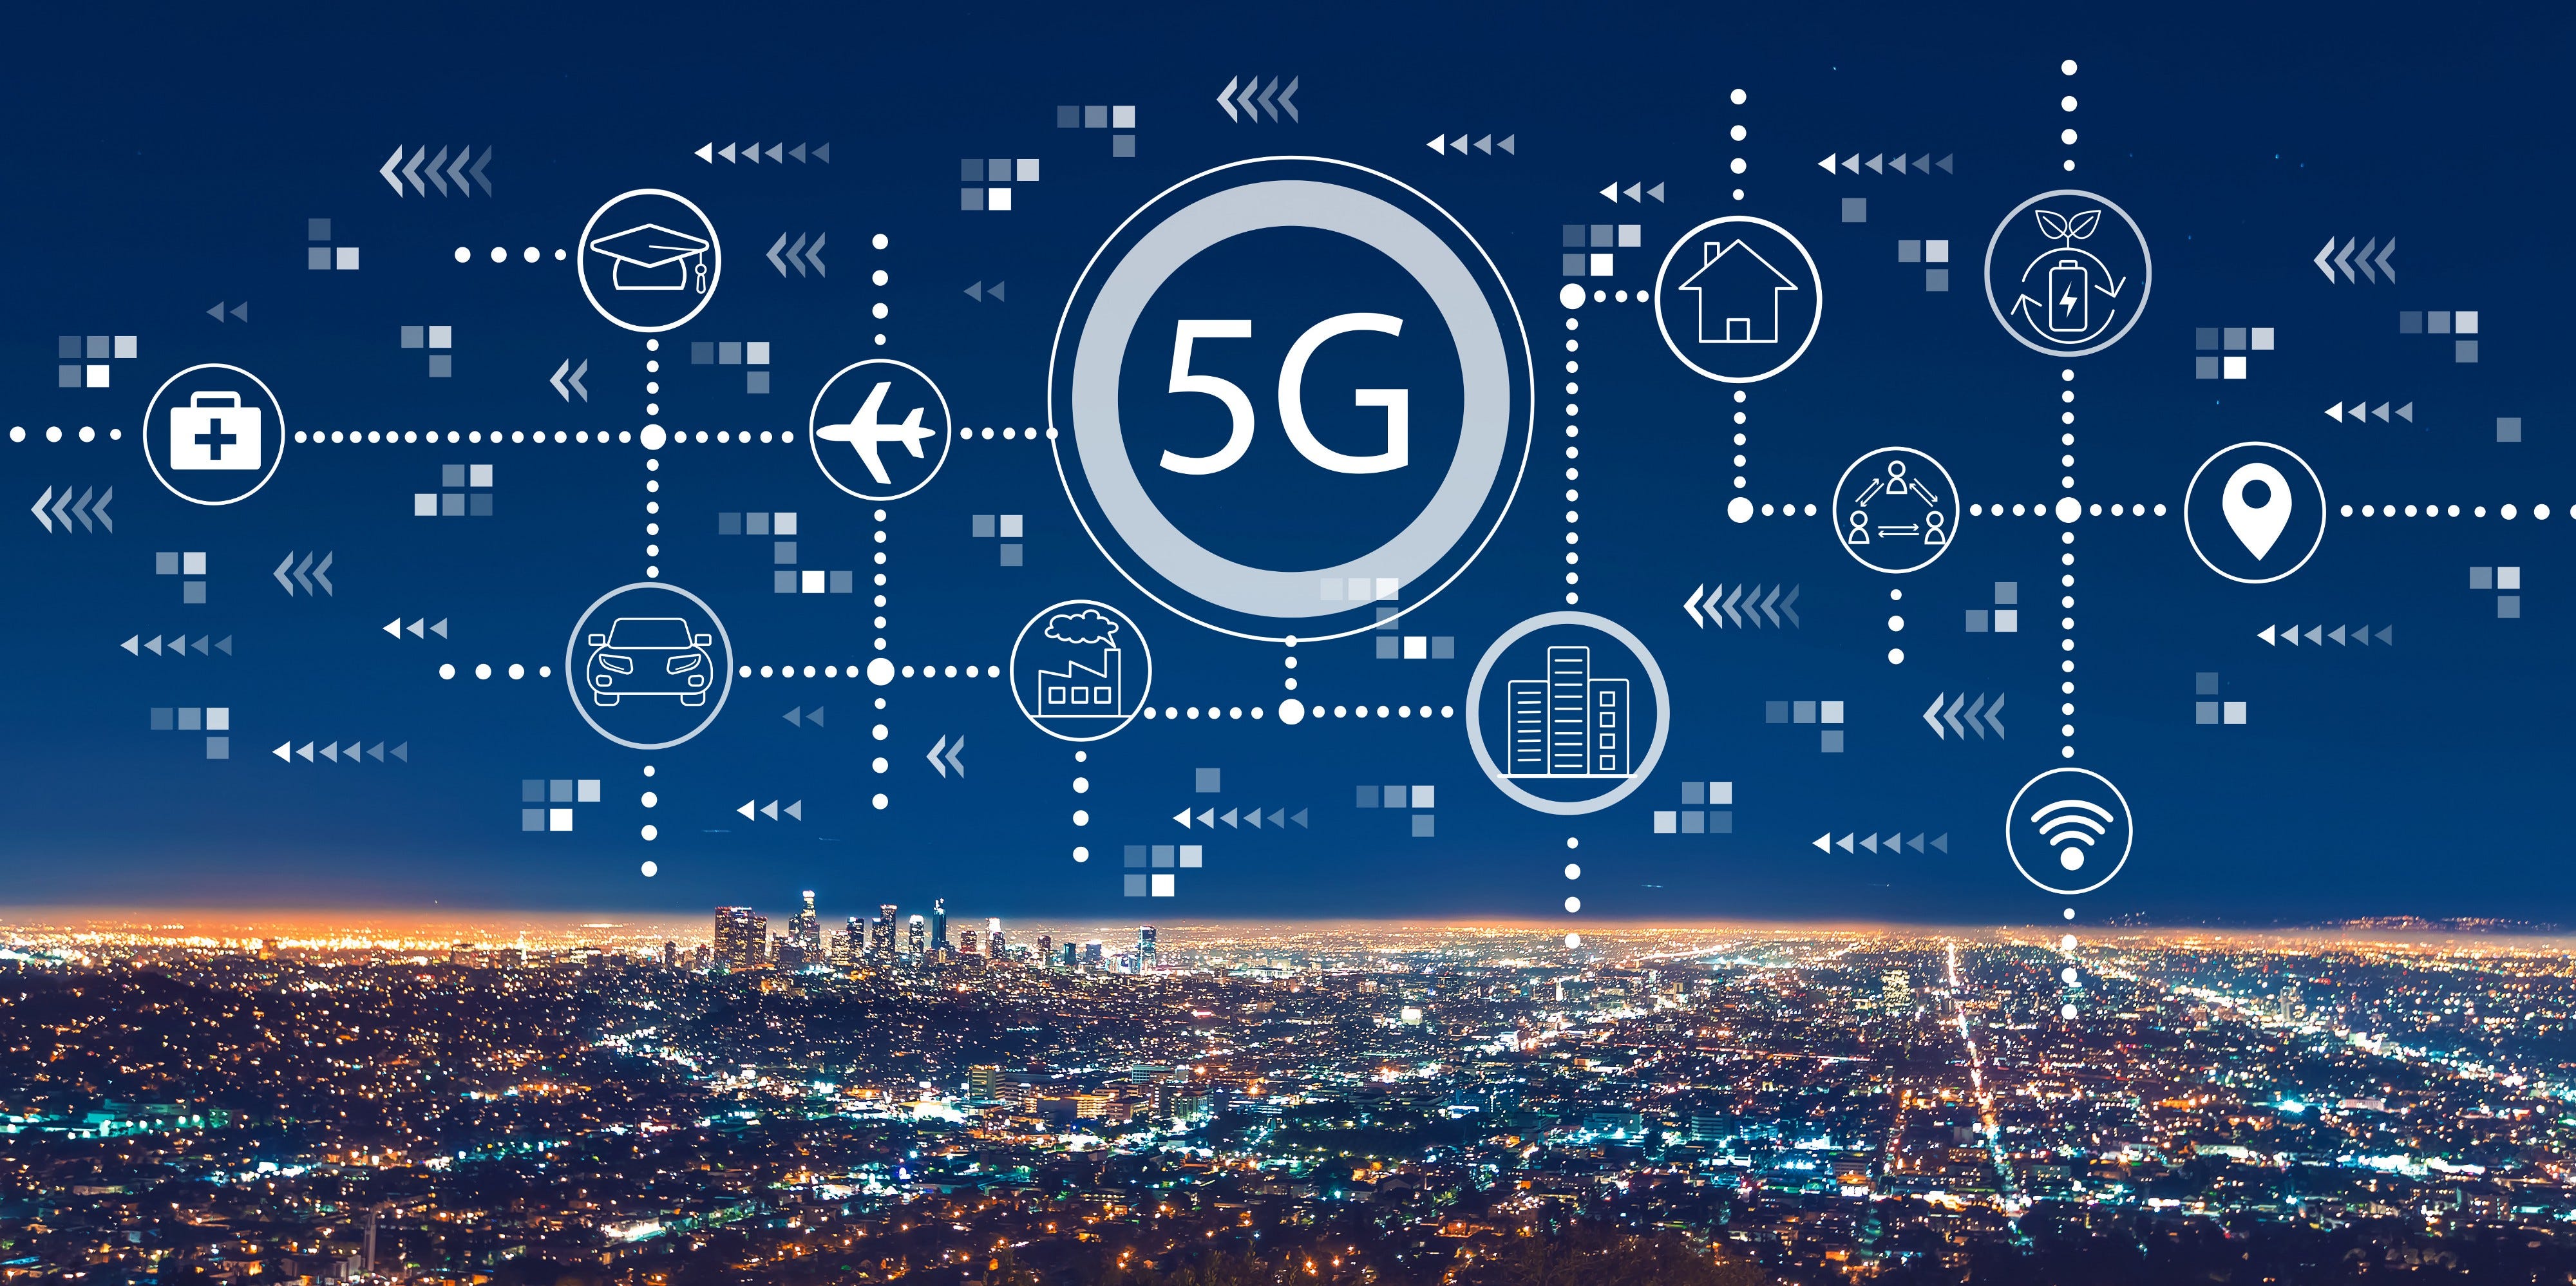 article on 5g mobile technology